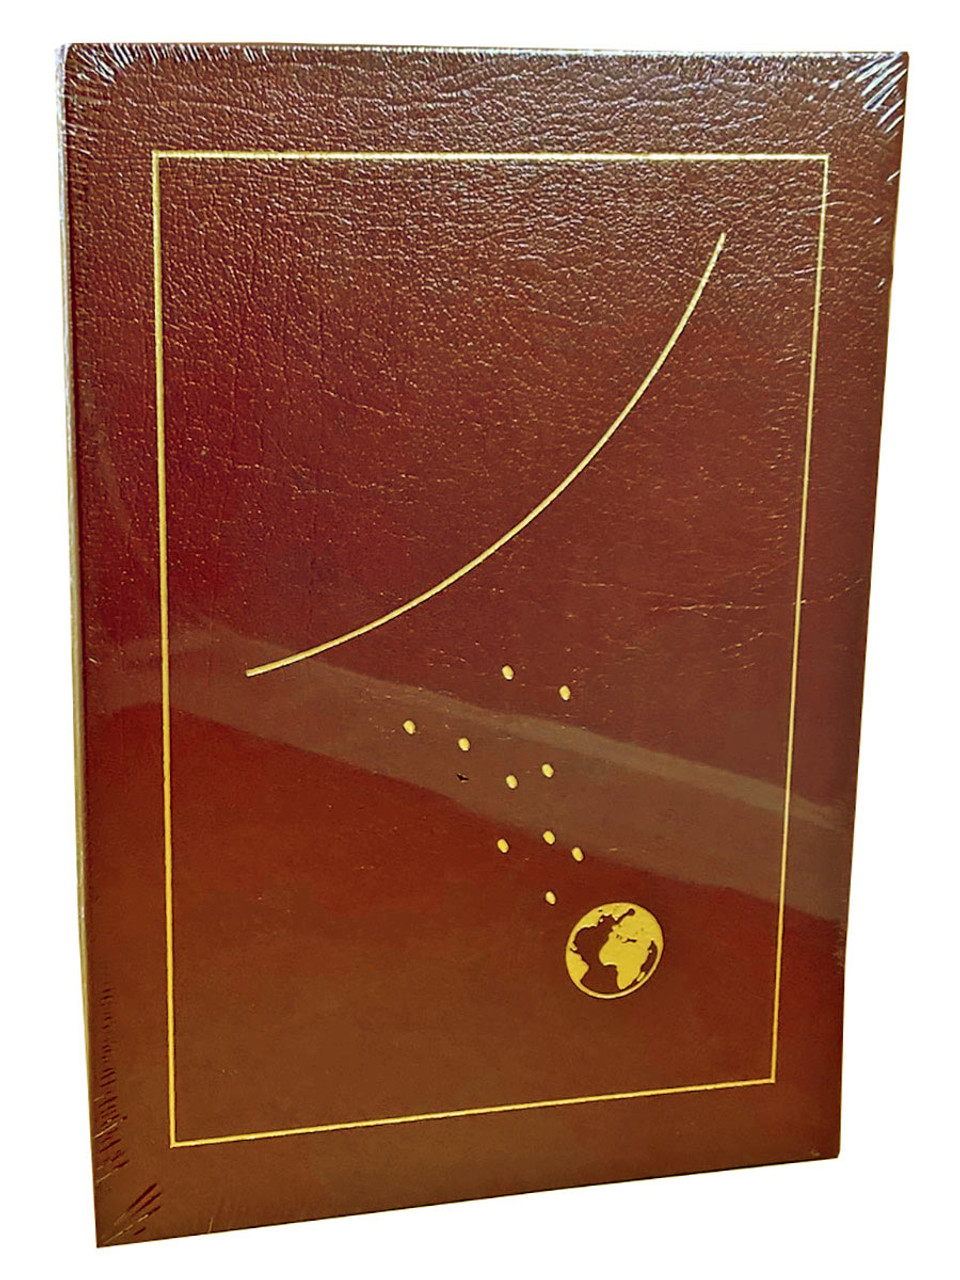 Easton Press 1964 - H. G. Wells "The War of the Worlds" Limited Edition, Leather Bound Collector's Edition [Sealed]